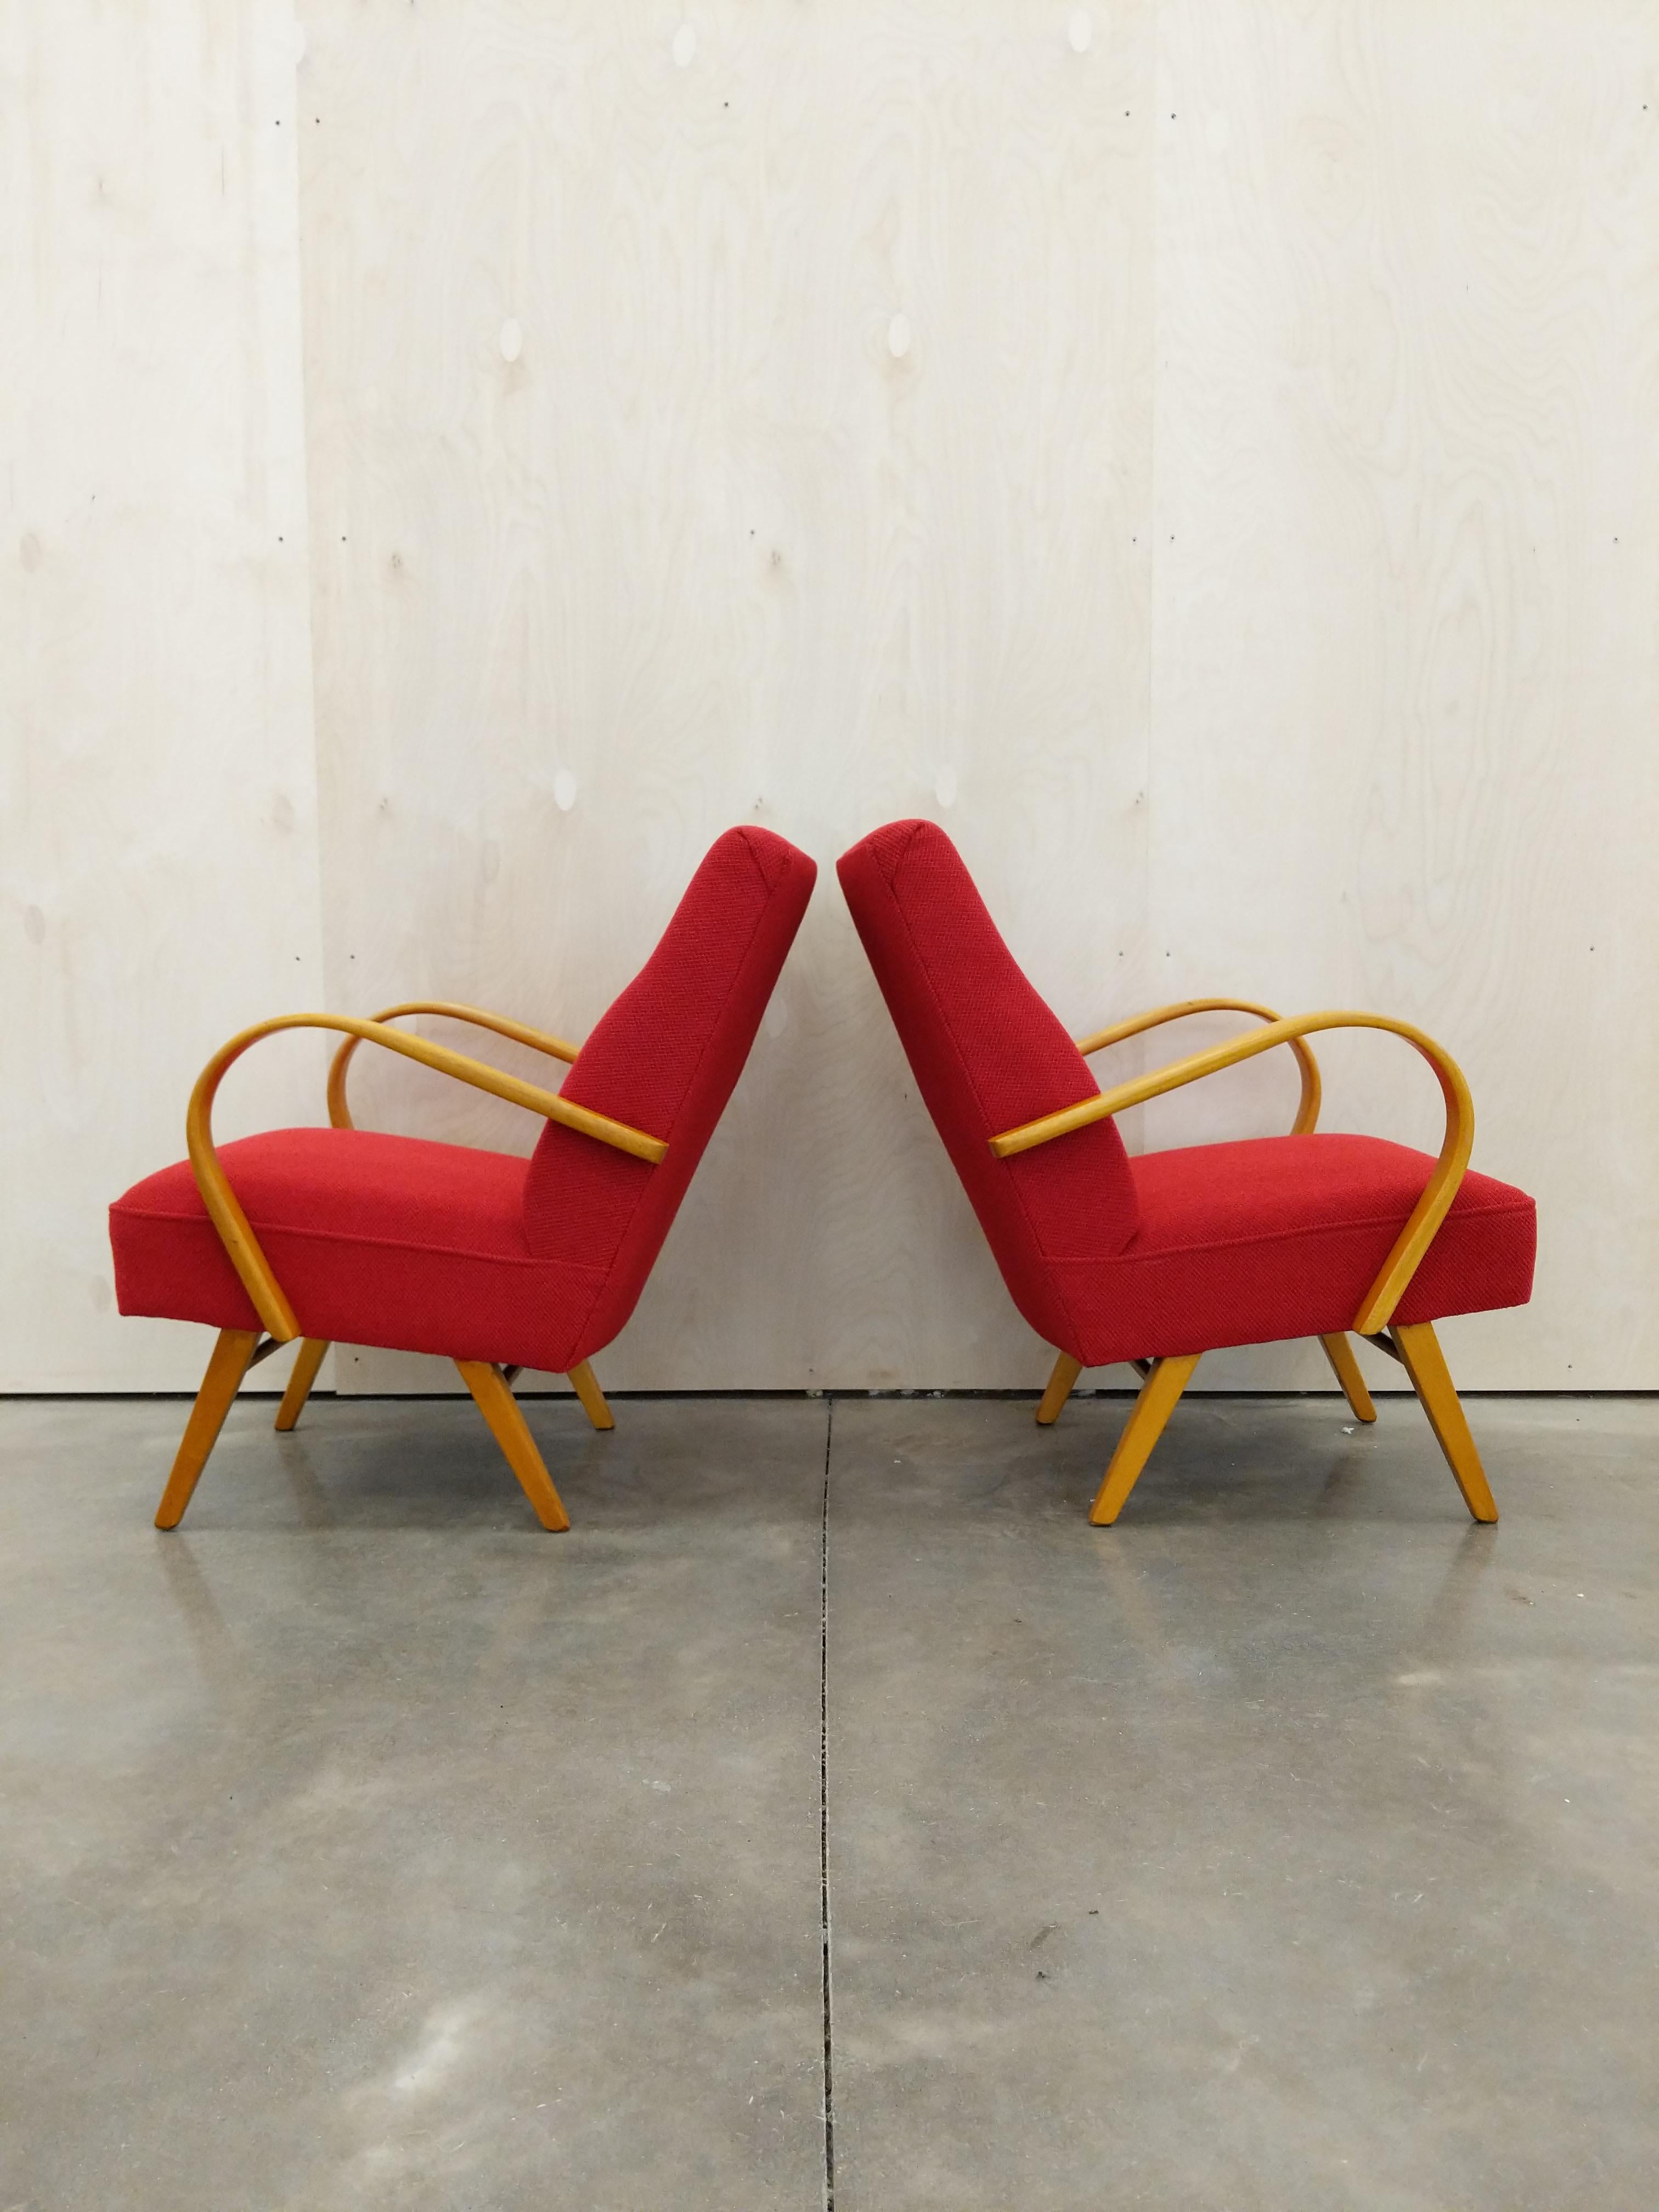 Pair of Vintage Czech Mid Century Modern Lounge Chairs In Good Condition For Sale In Gardiner, NY